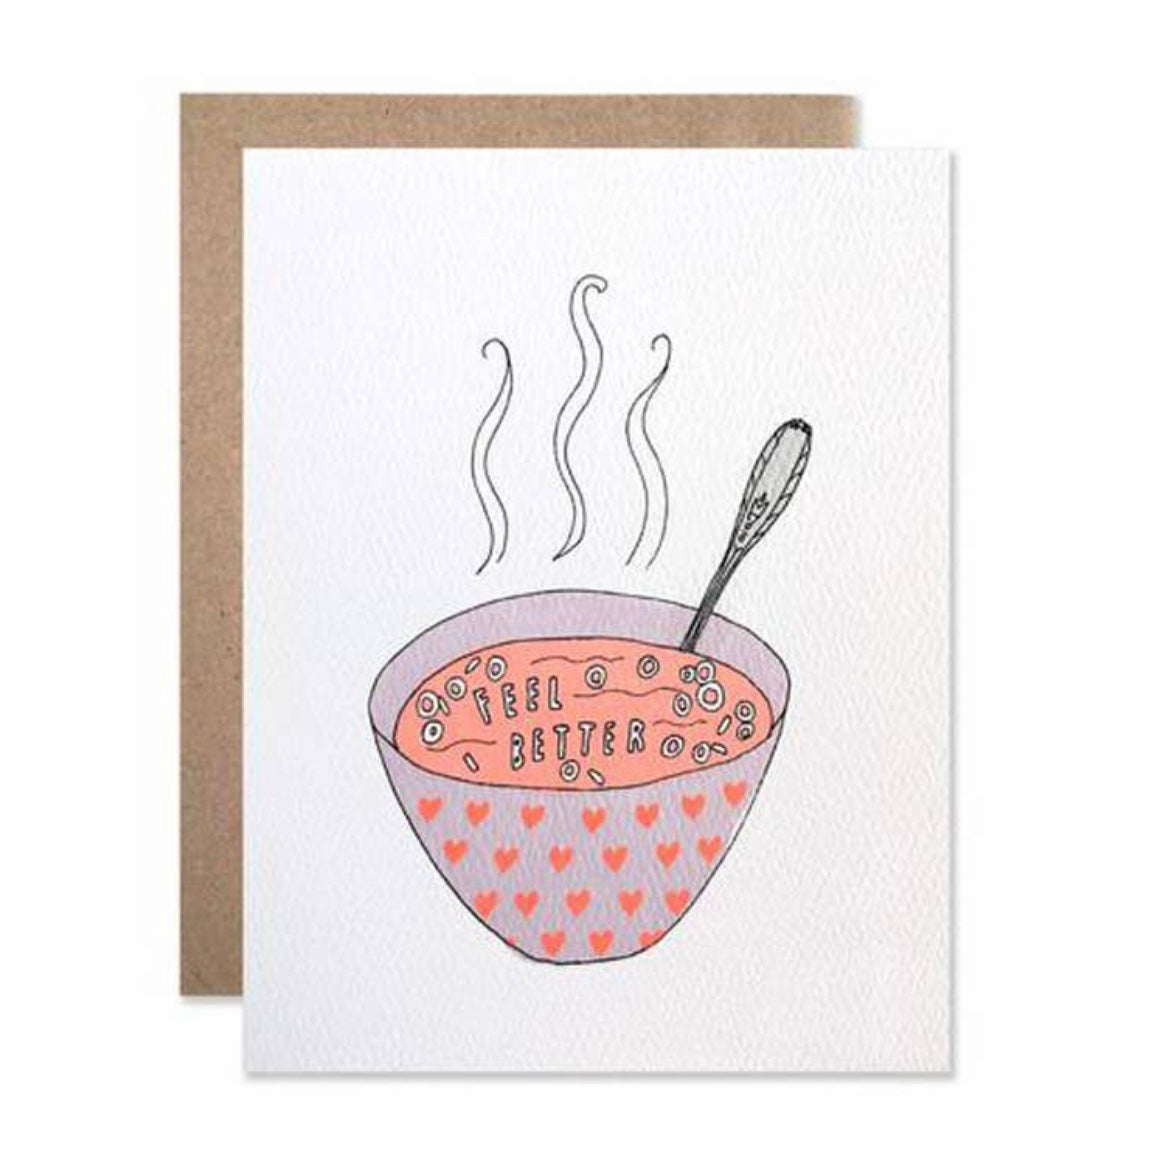 Feel better soup greeting card